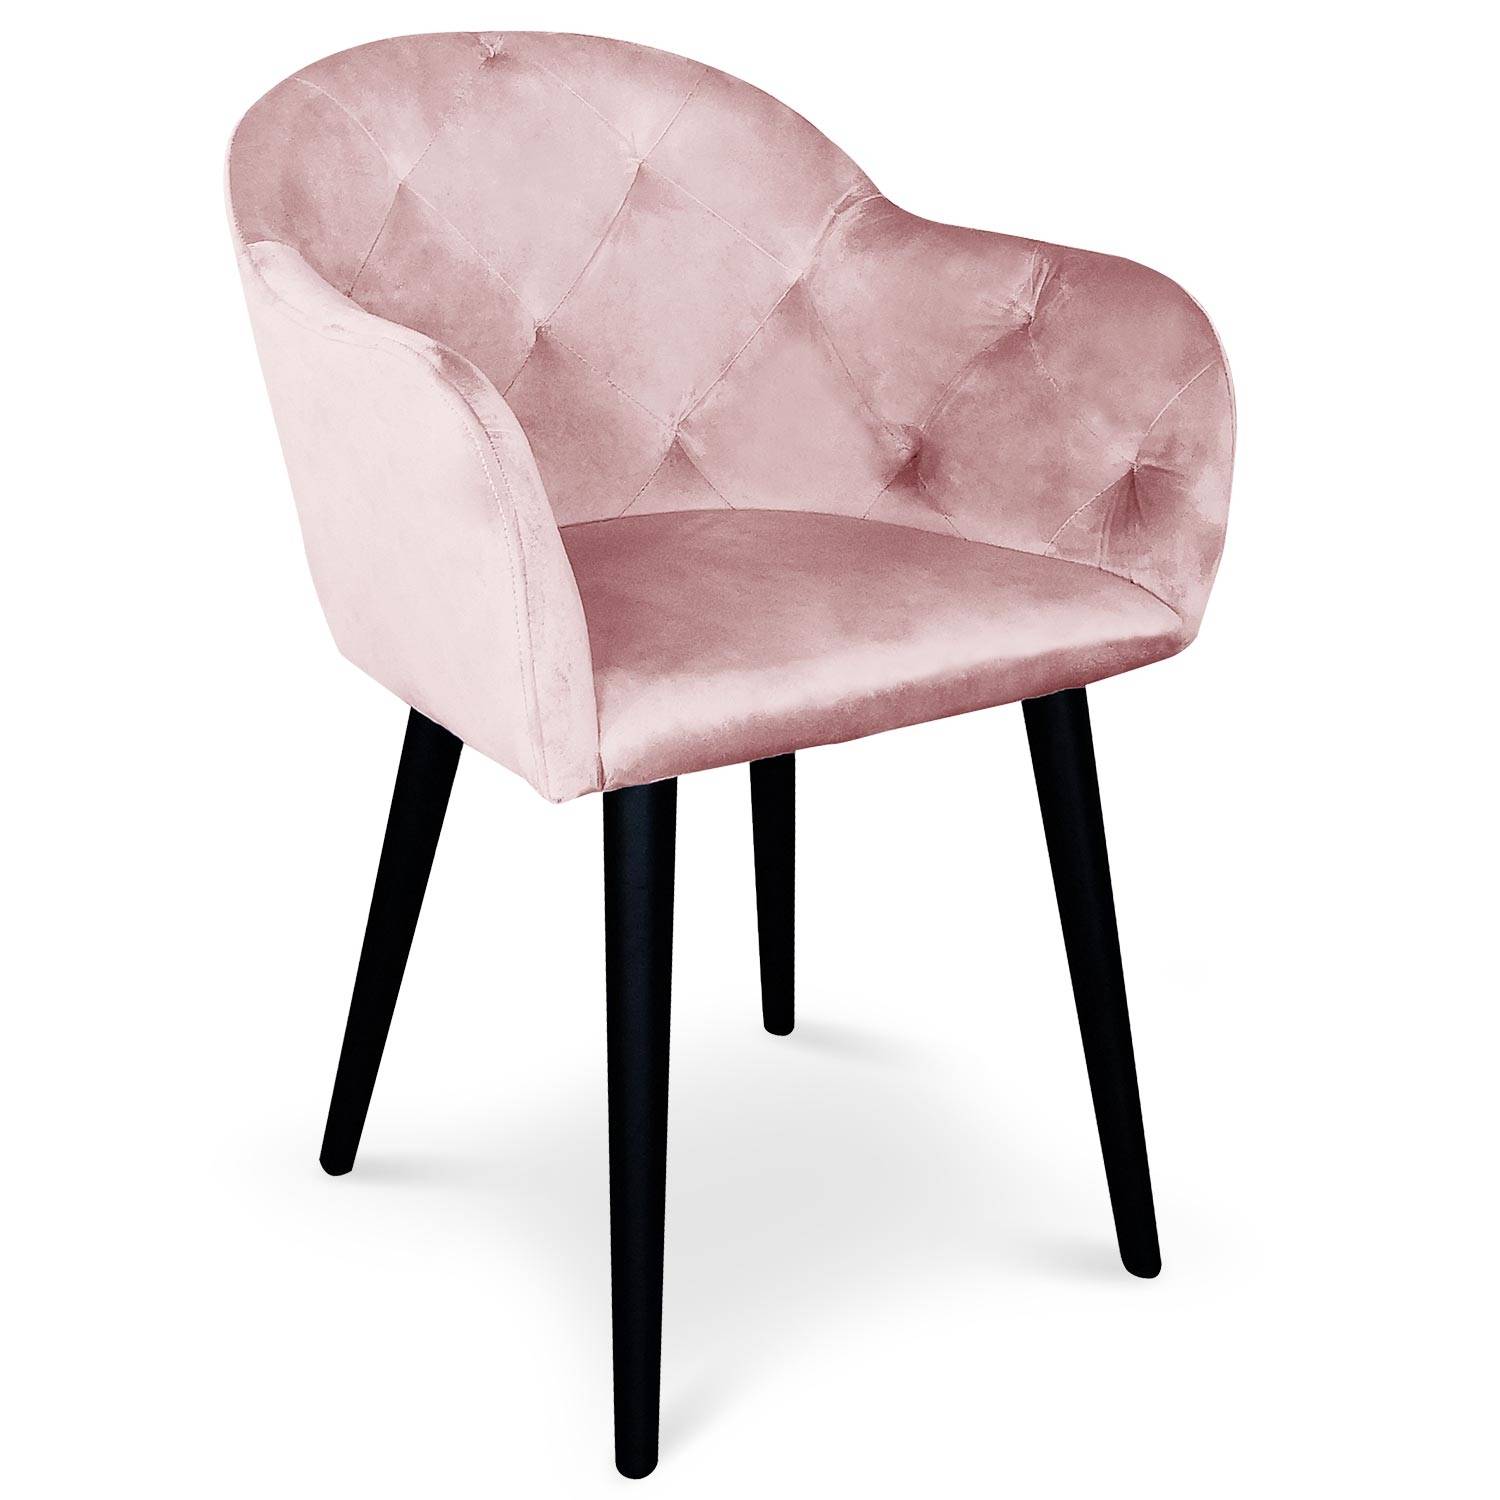 Chaise / Fauteuil Honorine Velours Rose